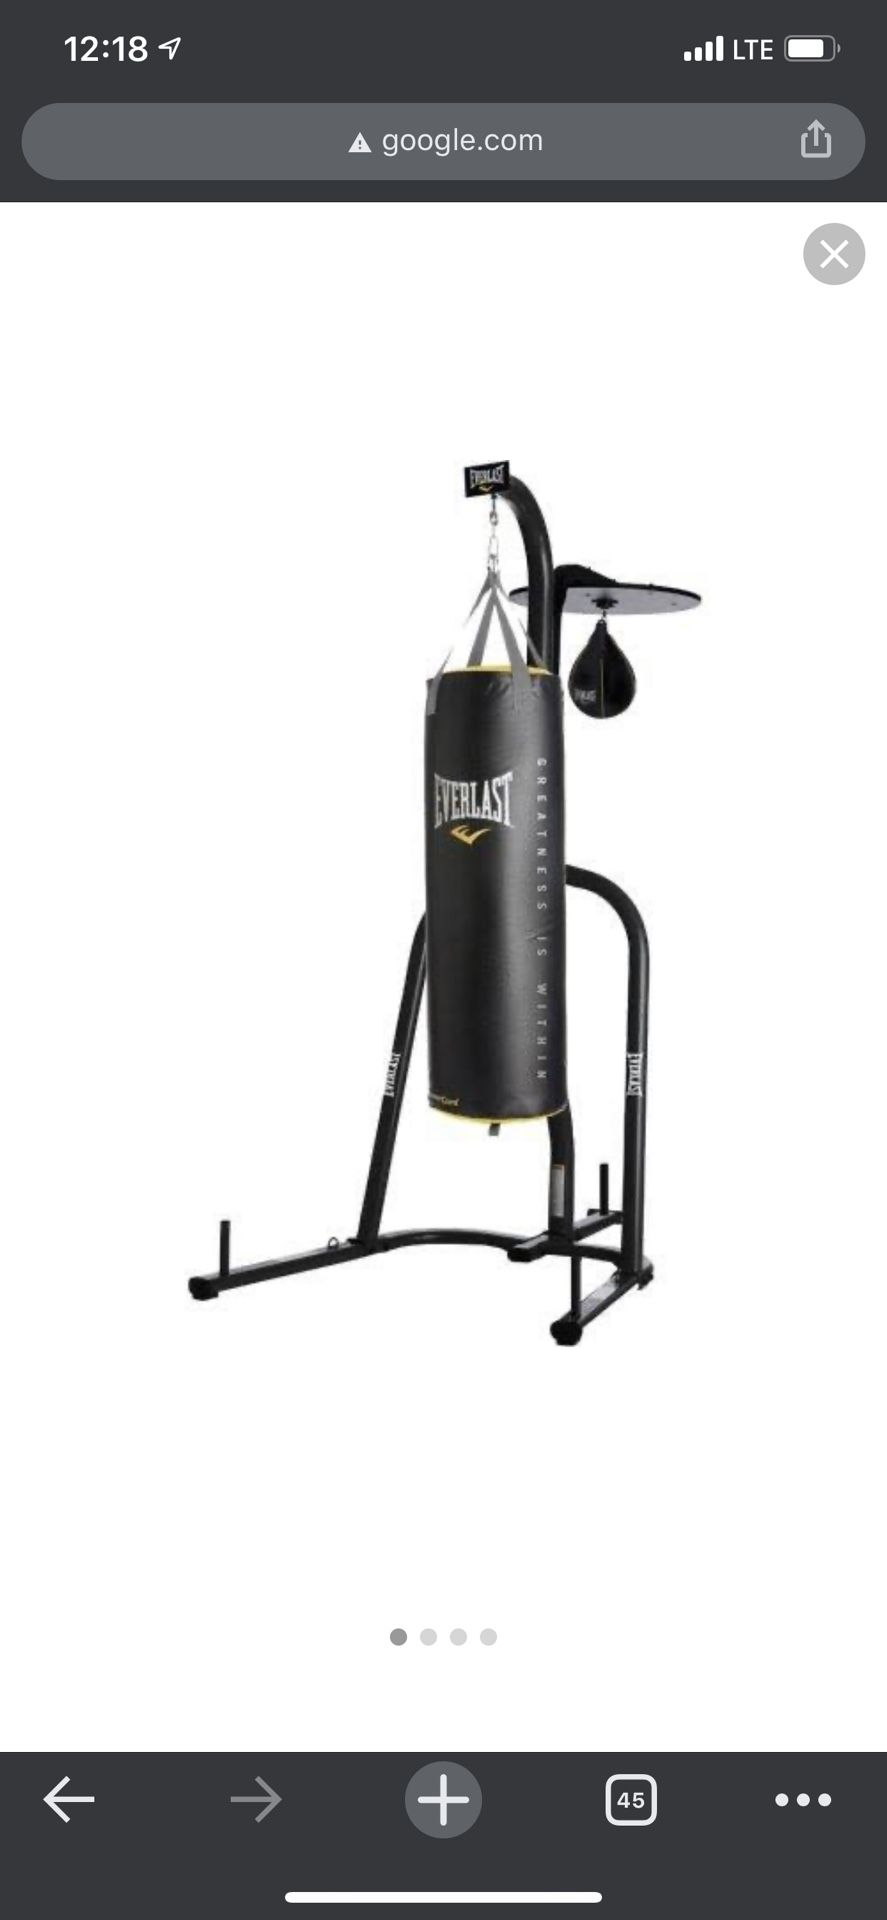 Everlast Dual Station Punching Bag Stand